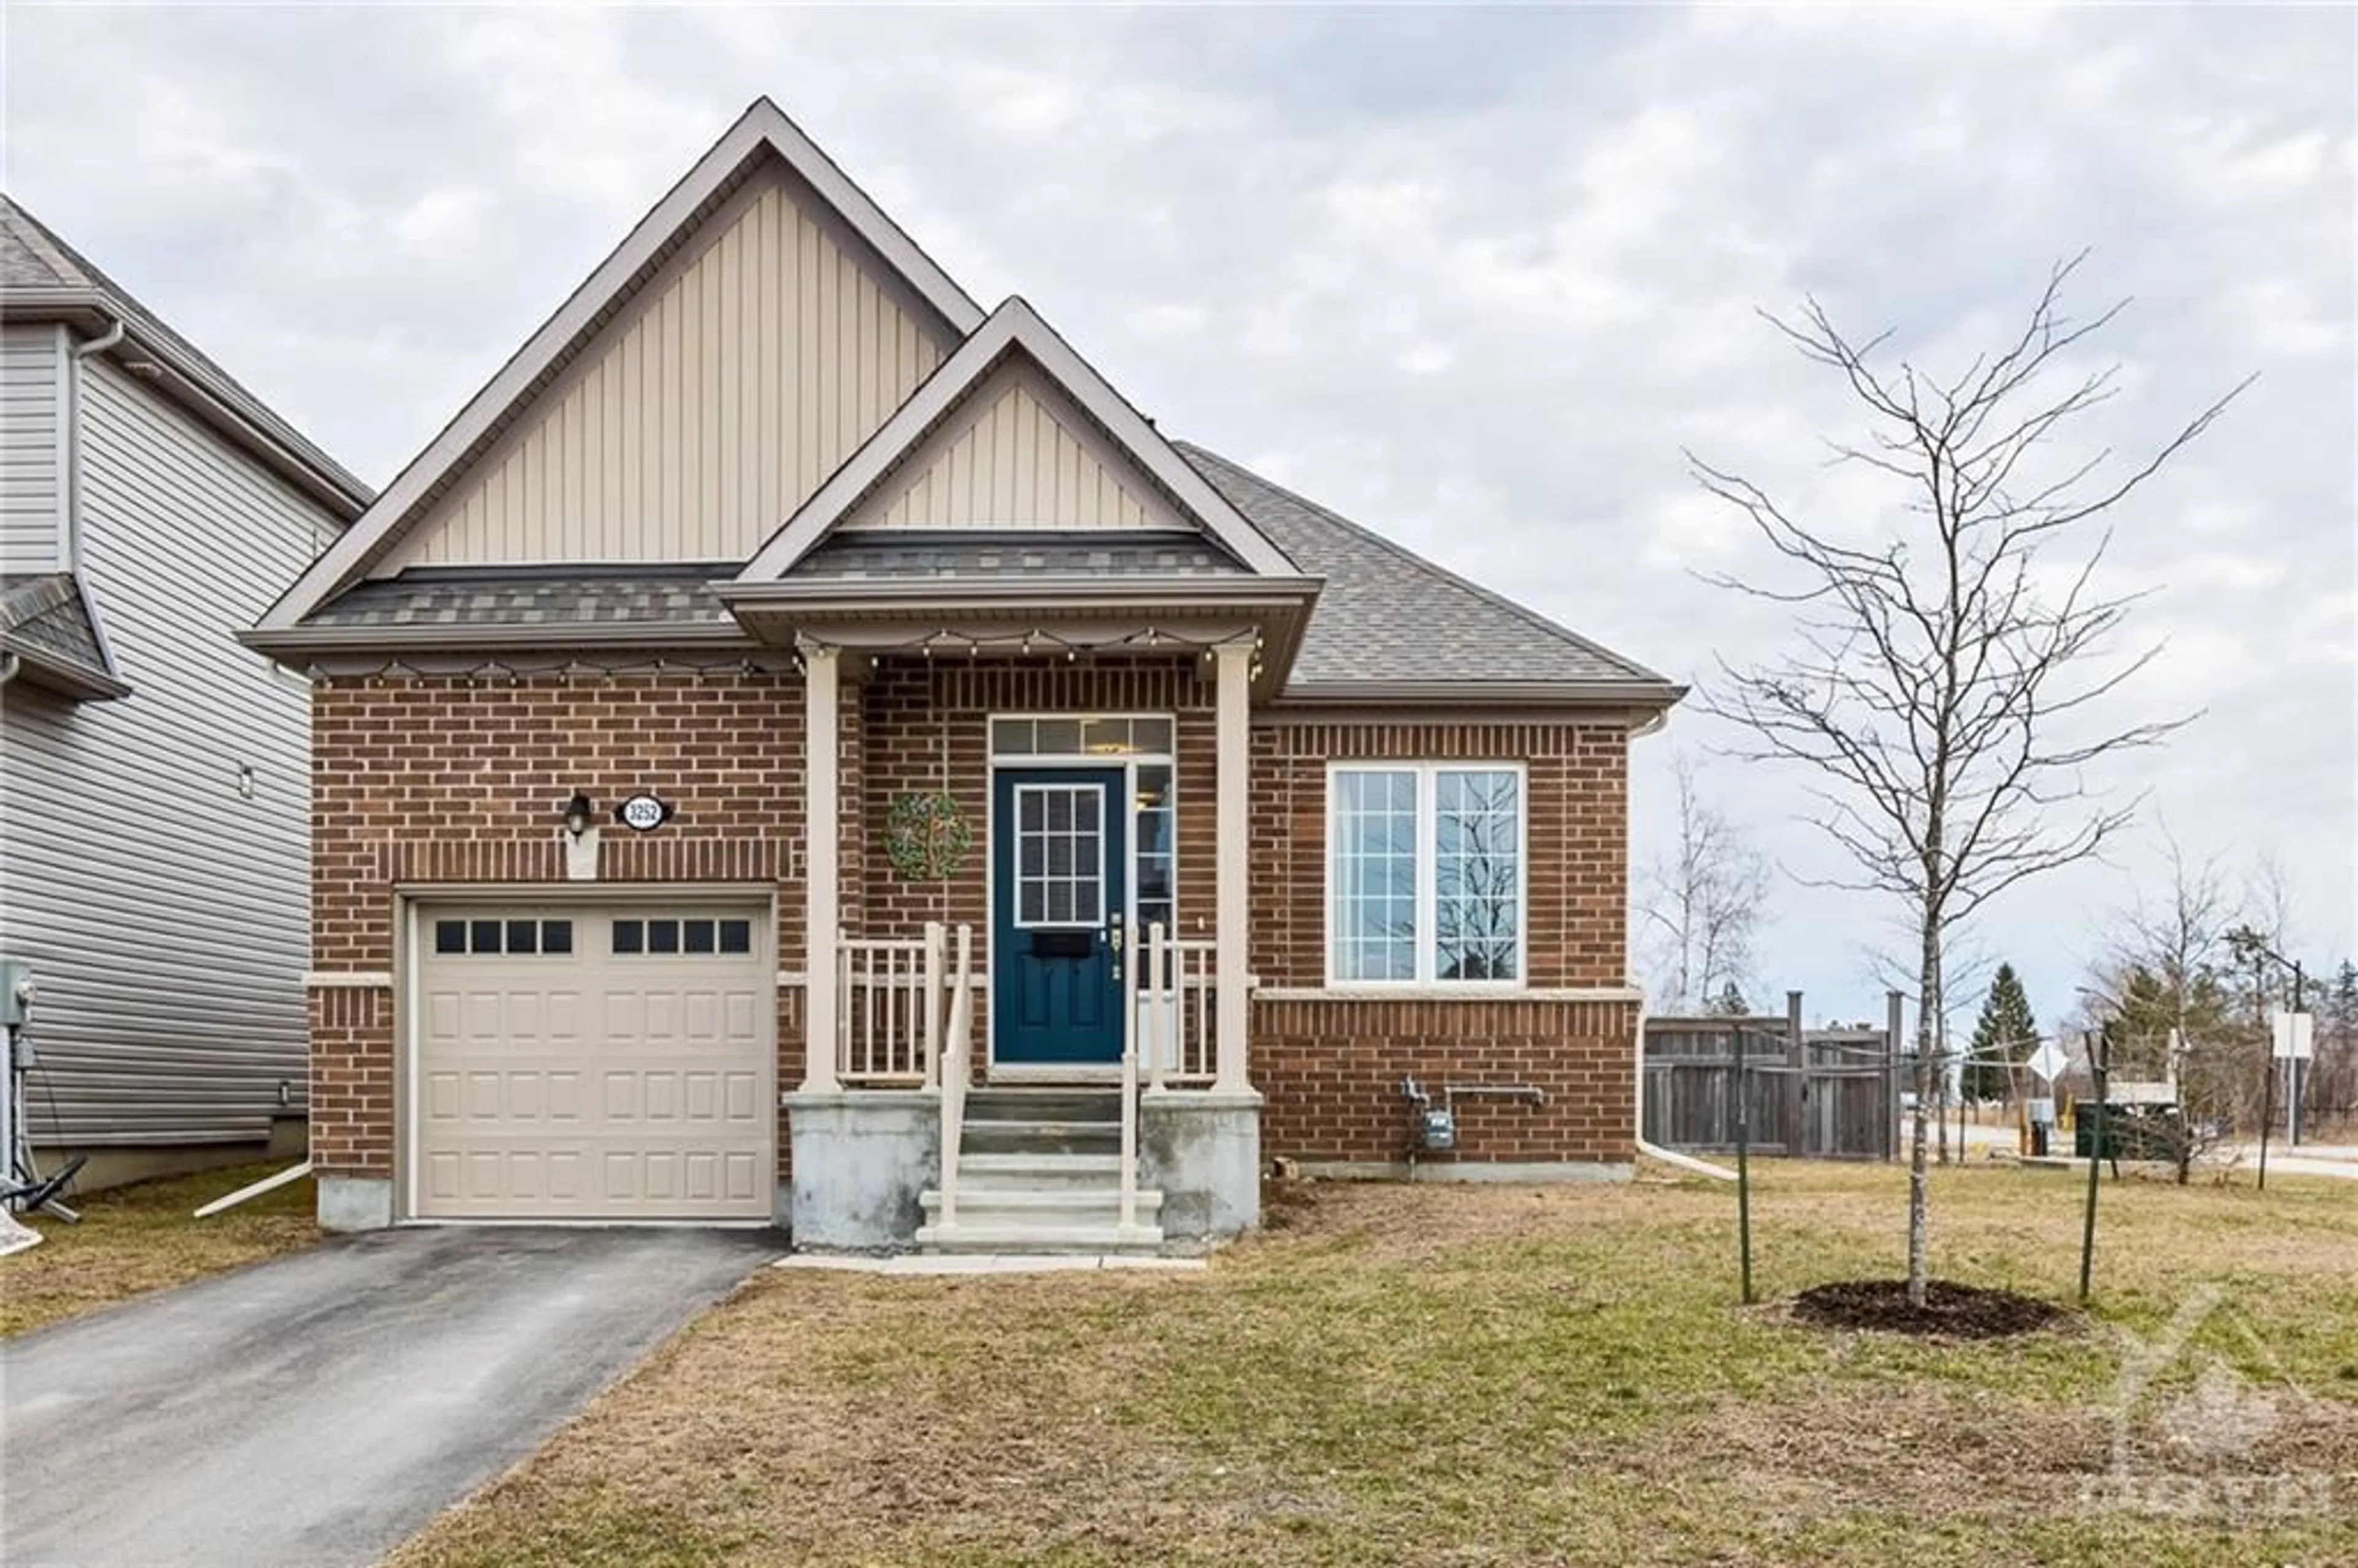 Home with brick exterior material for 3252 HARVESTER Cres, Kemptville Ontario K0G 1J0